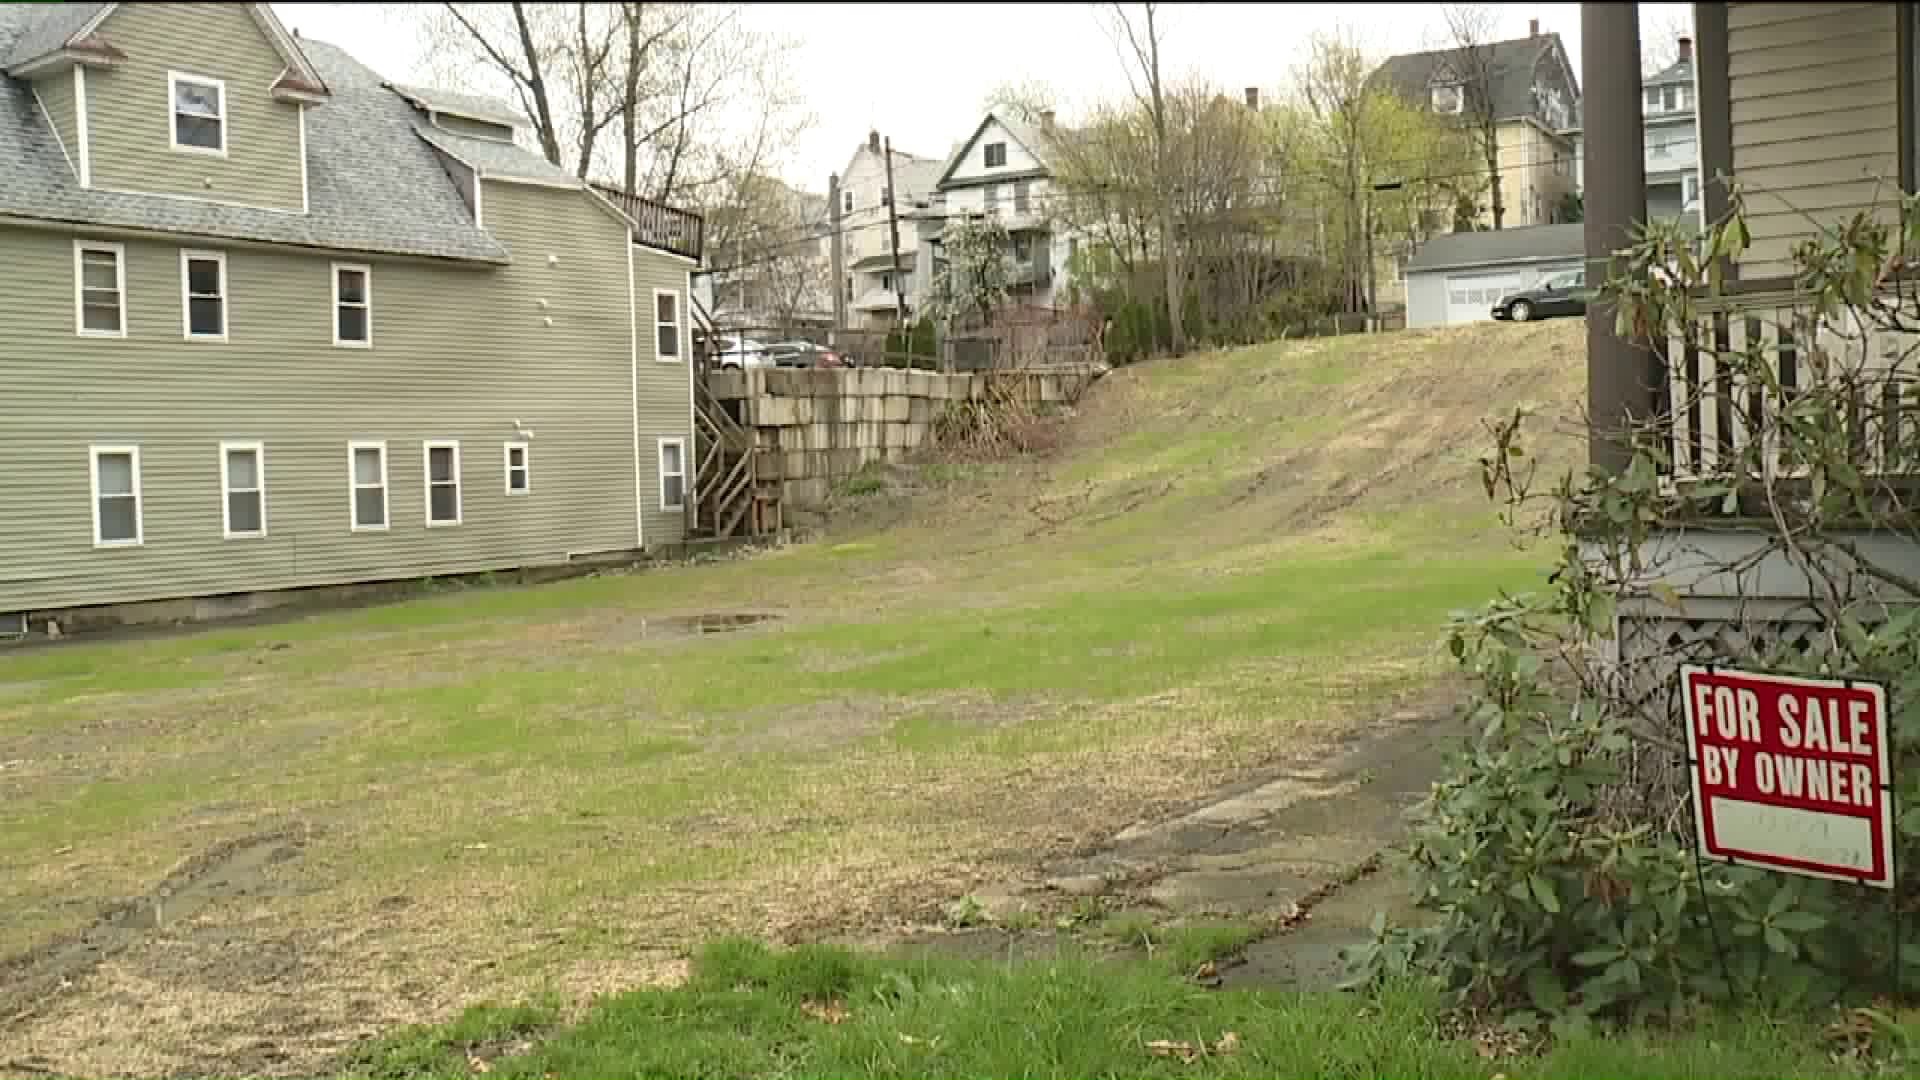 Land Bank Makes it Easier to Buy Properties in Lackawanna County